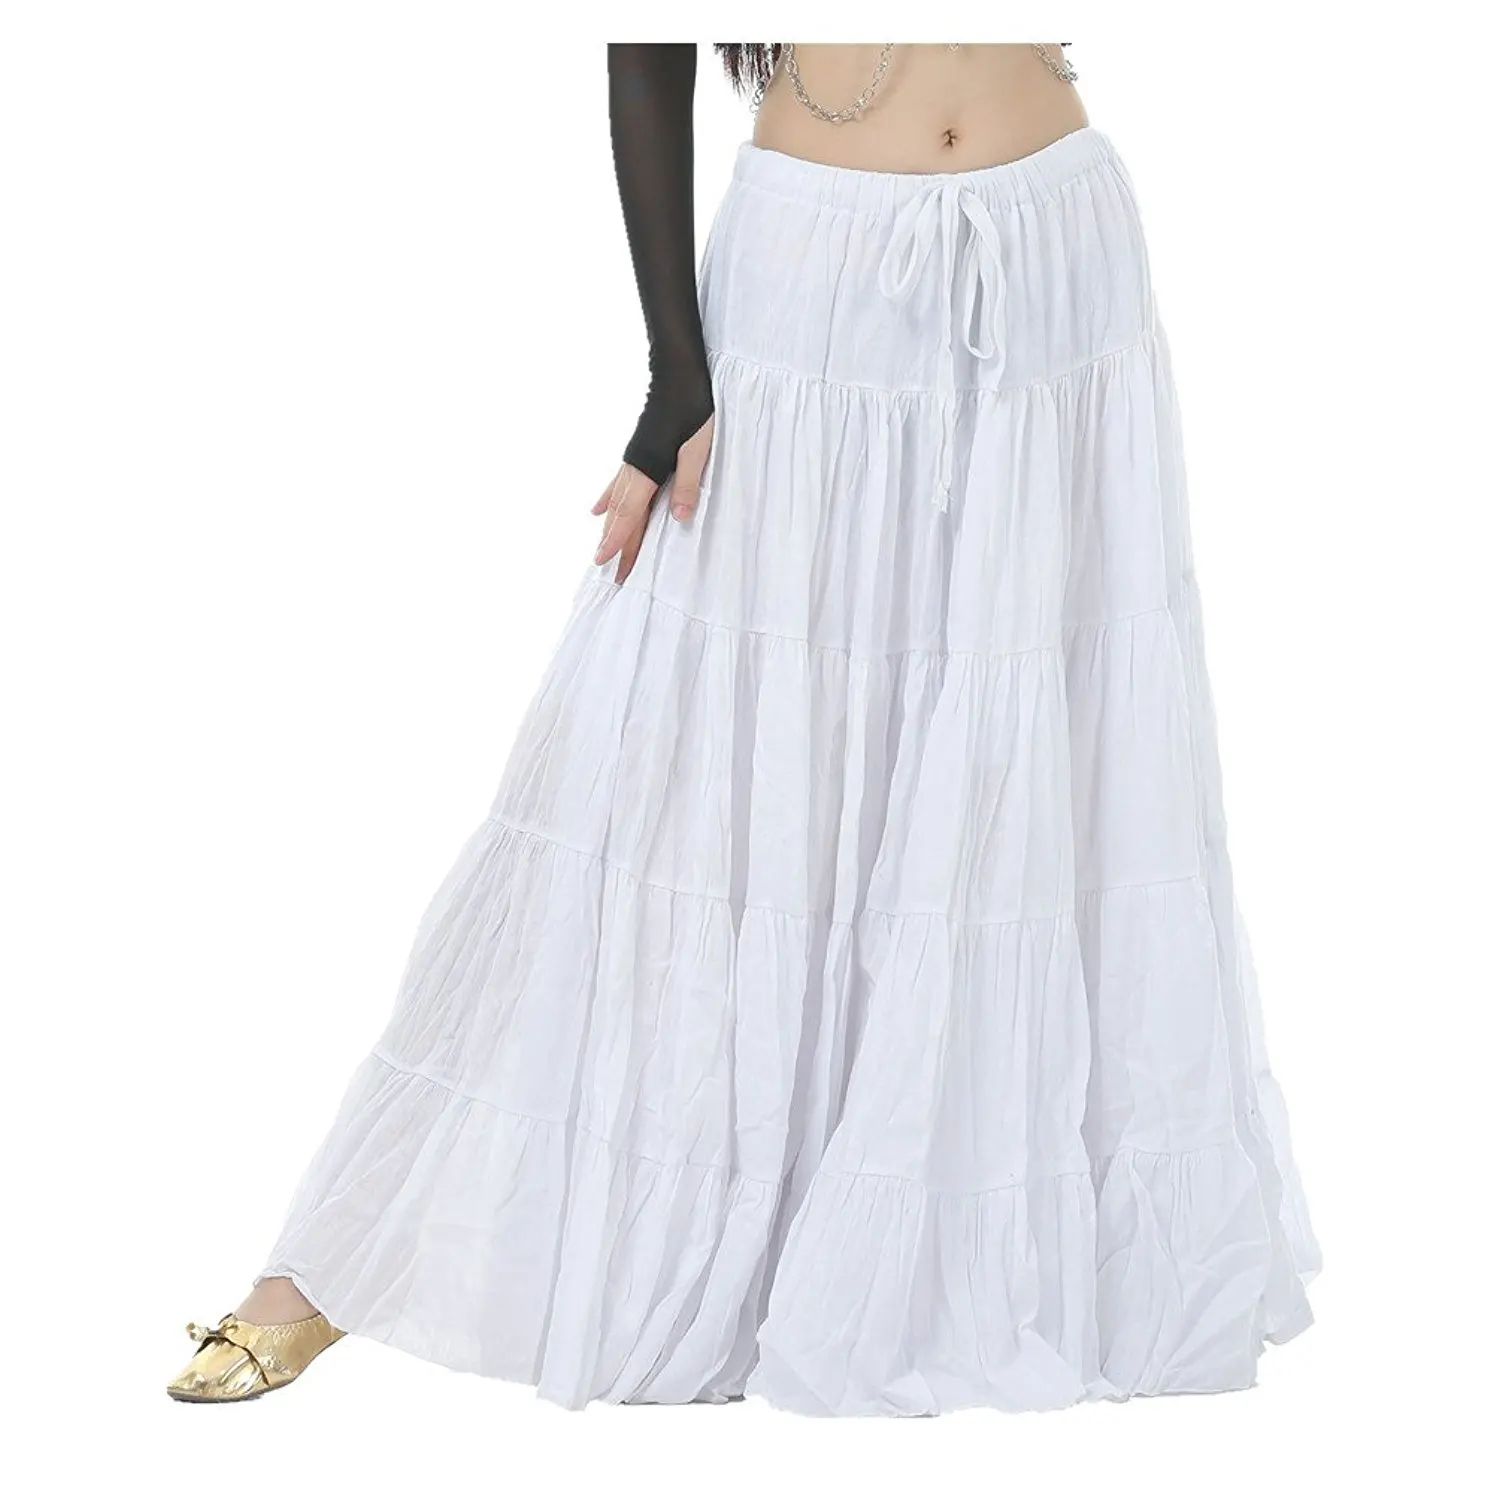 Cheap Maxi Skirt Tribal, find Maxi Skirt Tribal deals on line at ...